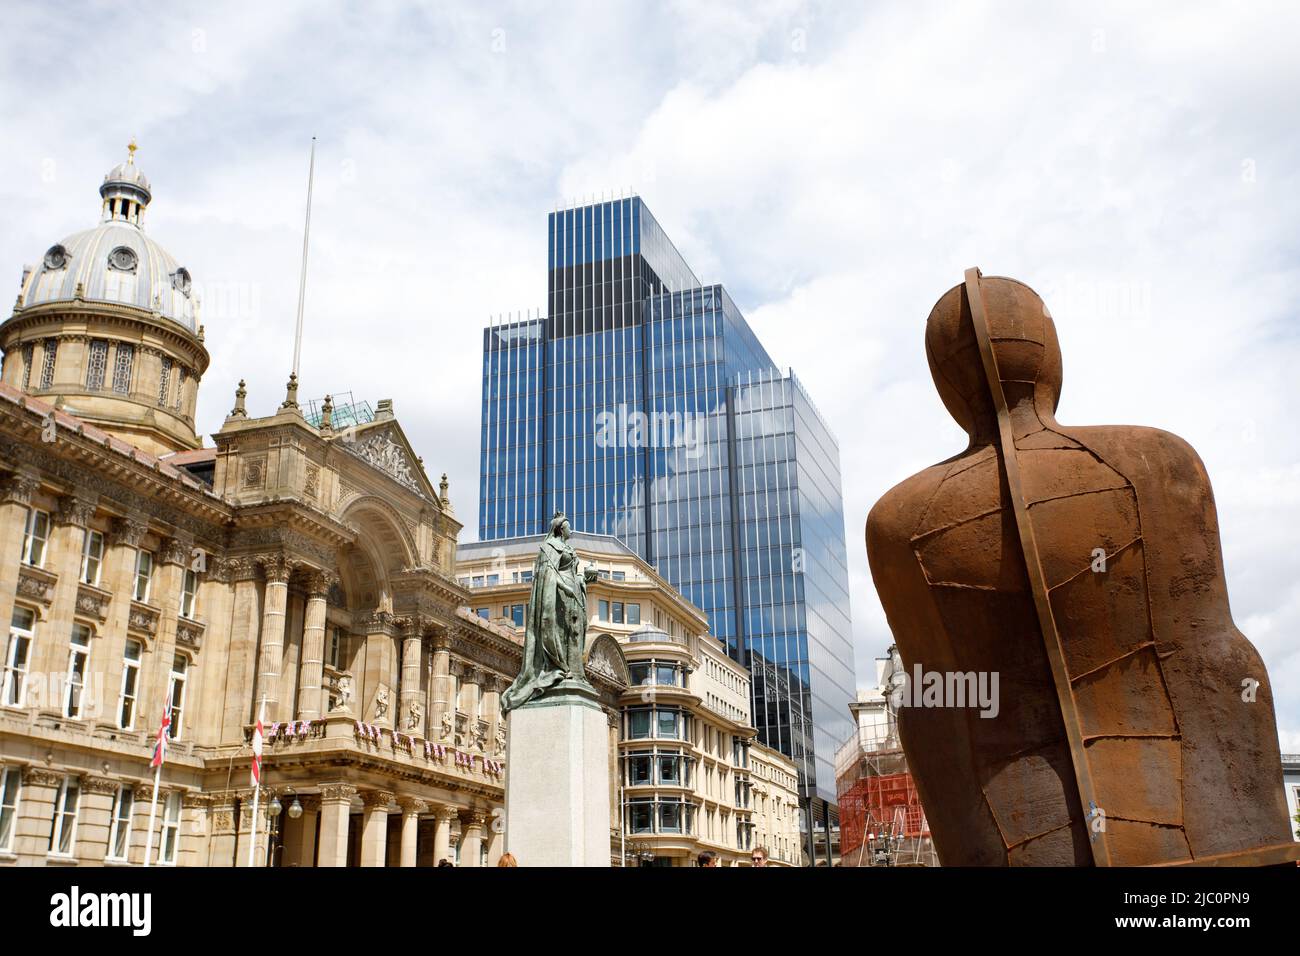 Victoria Sqaure, Birmingham. The centre of the City. The picture shows the Council House to the left, Birmingham's tallest building, 103 Colmore Row, centre and the iron man statue by Anthony Gormley. Stock Photo